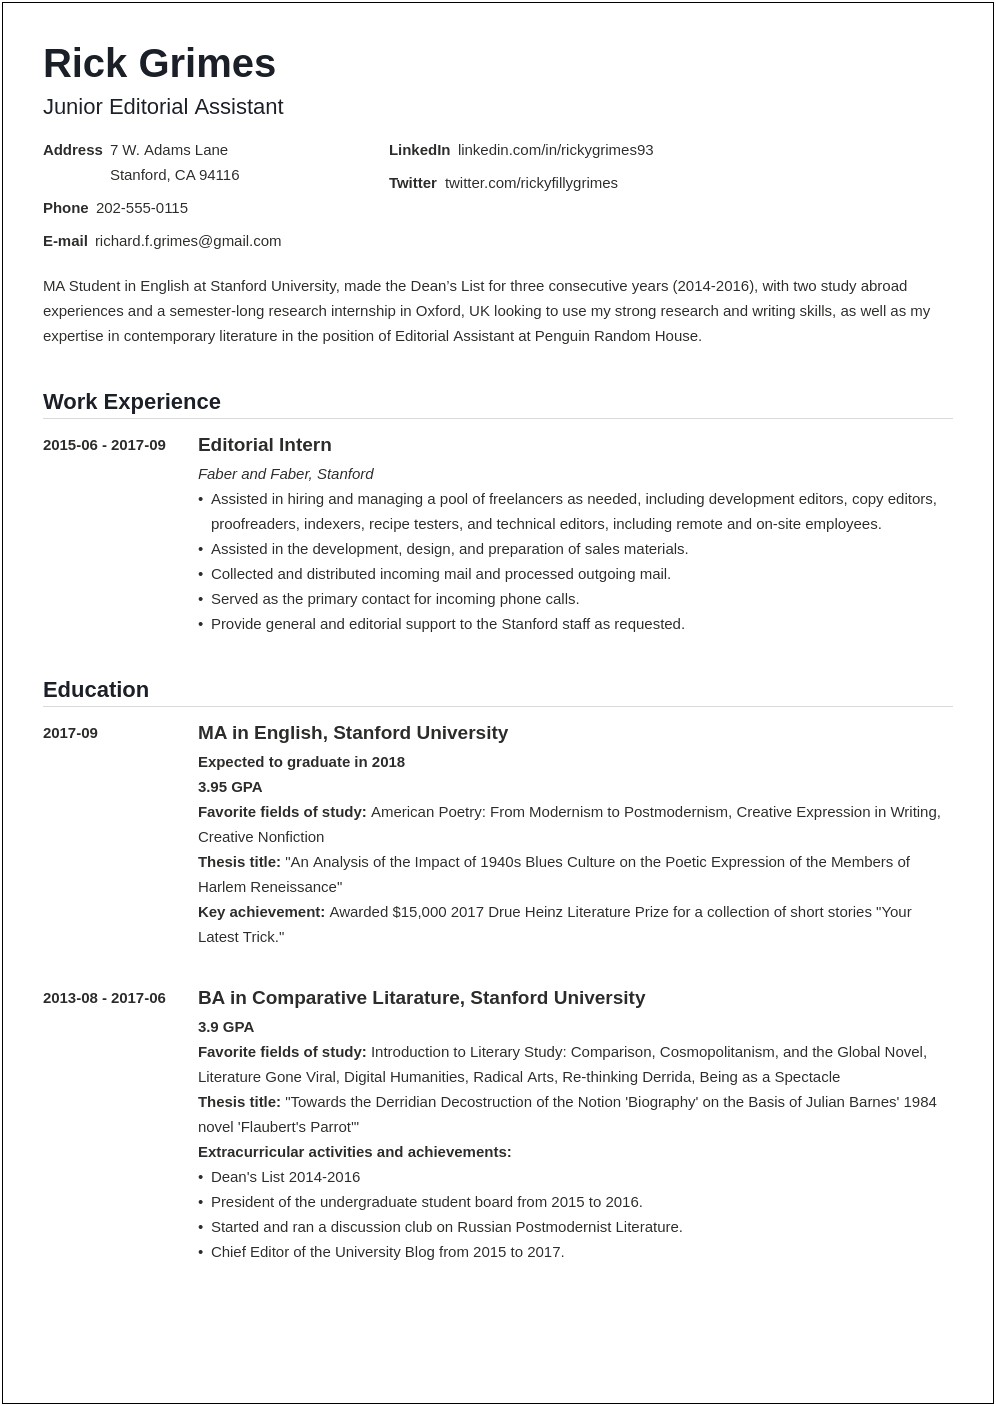 Basic Resume Template For College Students